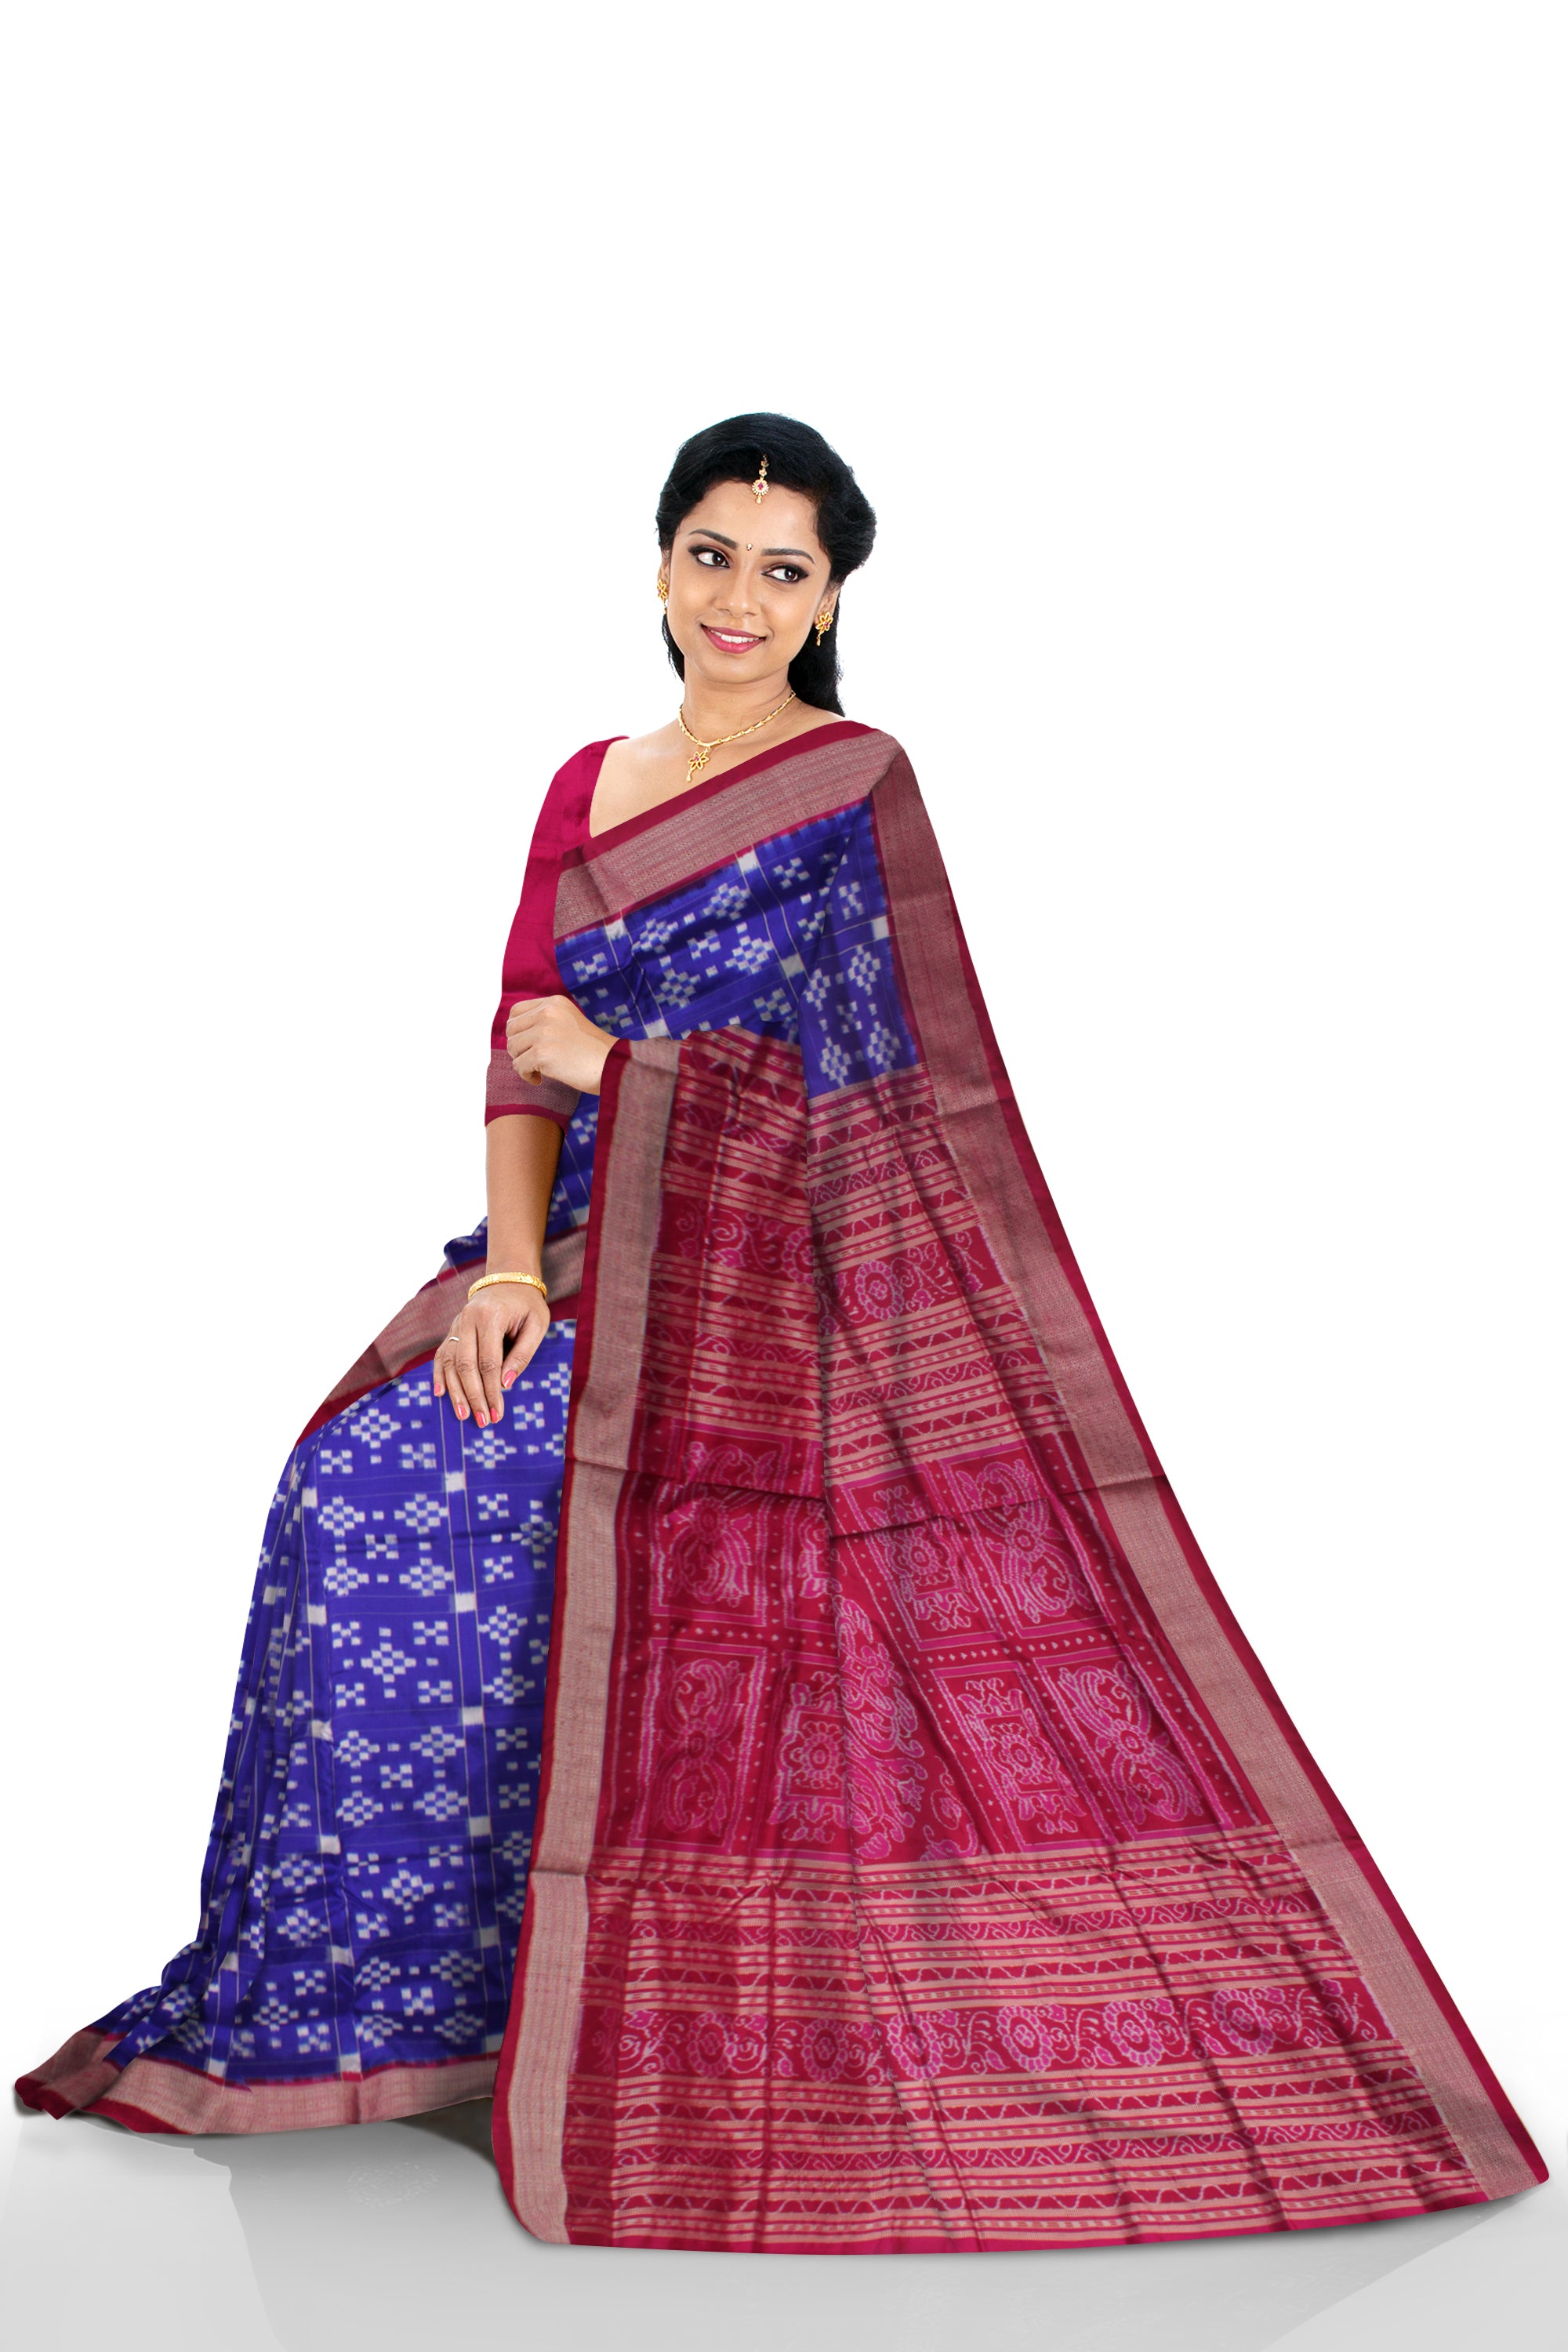 PASAPALI BOX PATTERN PURE SILK SAREE IS BLUE AND ROSY-PINK COLOR BASE,COMES WITH MATCHING BLOUSE PIECE. - Koshali Arts & Crafts Enterprise